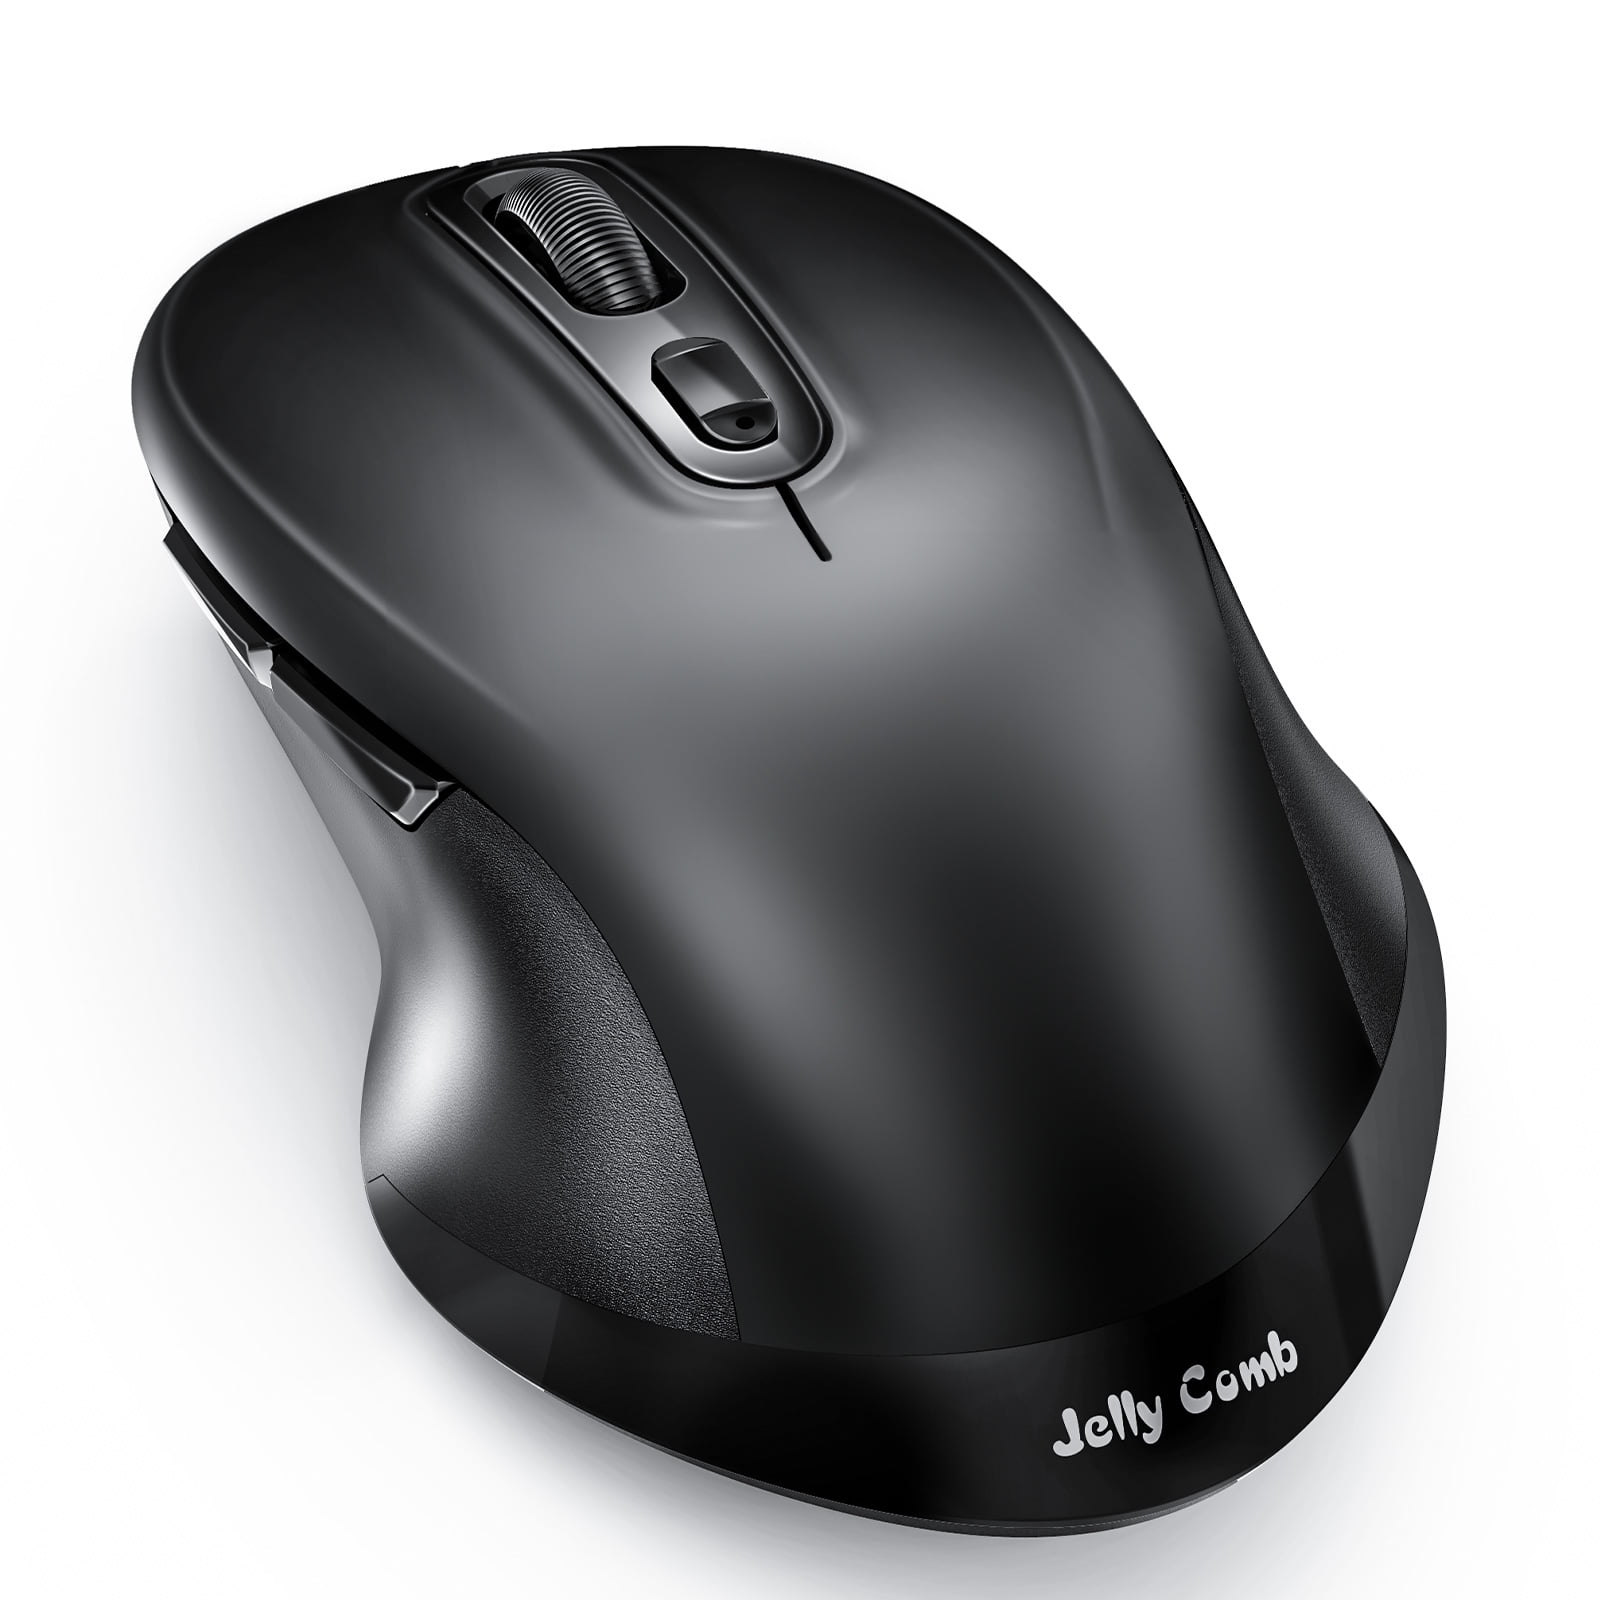 Jelly Comb Bluetooth Mouse, Jelly Comb Ergonomic Dual Mode Wireless with Bluetooth, 2.4GHz USB Connection, Easy Switch up to 3 Devices - Walmart.com